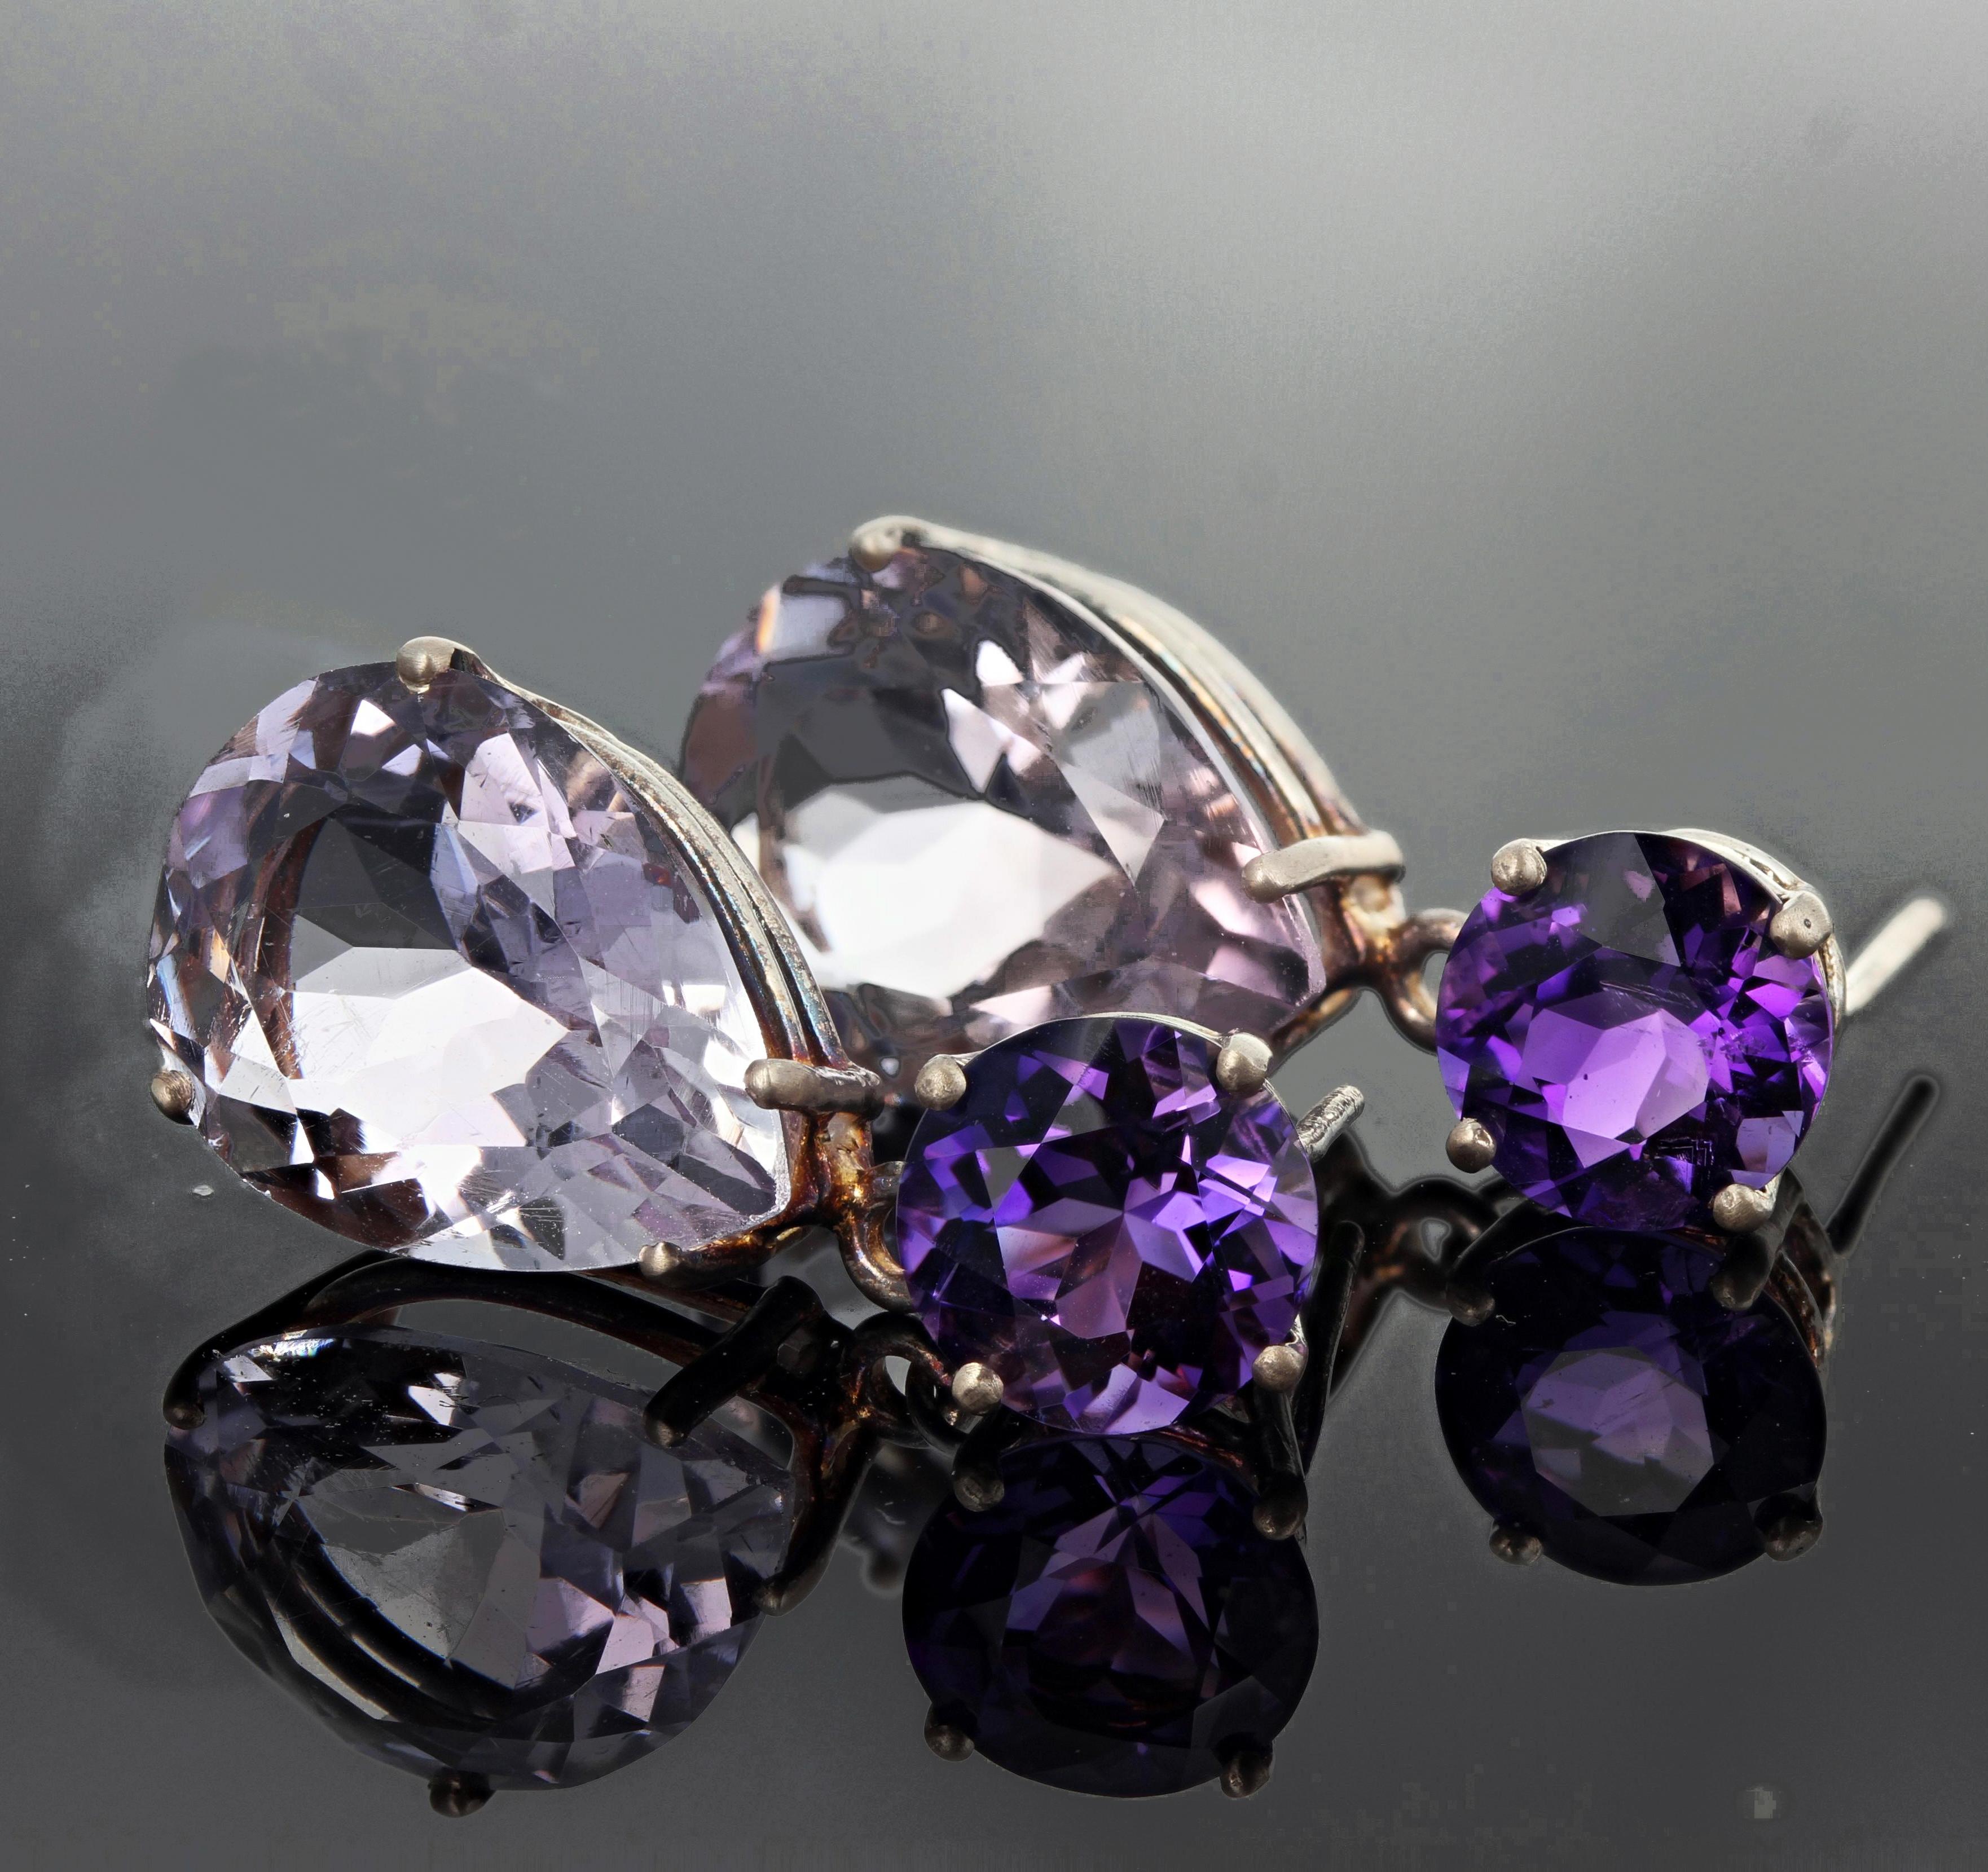 1.37 carats each of sparkling purple Amethysts (8 mm x 6 mm) dangle beautiful pear cut pinky-purple 6.5 carats each of Rose of France (16 mm x 11 mm) set in sterling silver stud earrings.  They measure 1 inch long.  More from this seller by putting